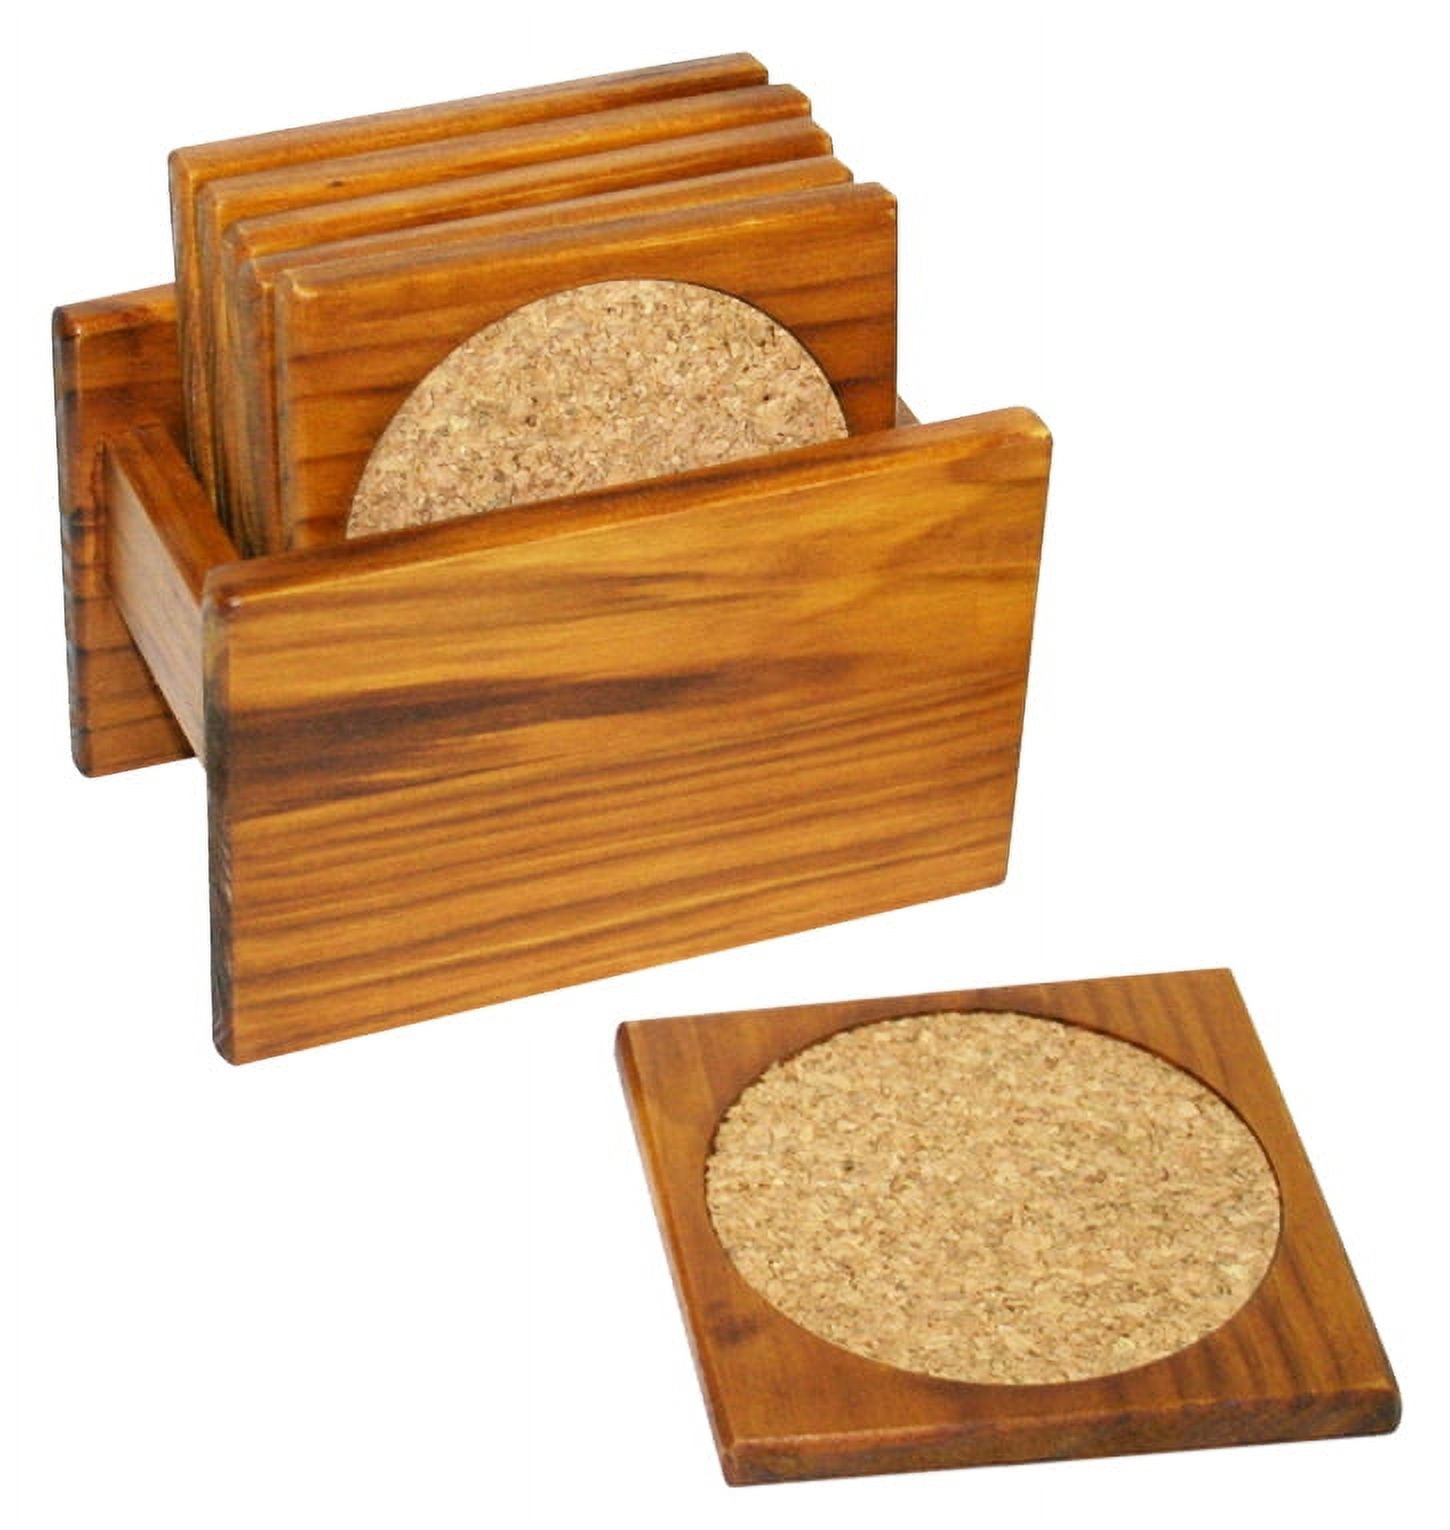 Walnut Coasters - Set of 4 with Holder and Cork Bottom by Virginia Boys Kitchens